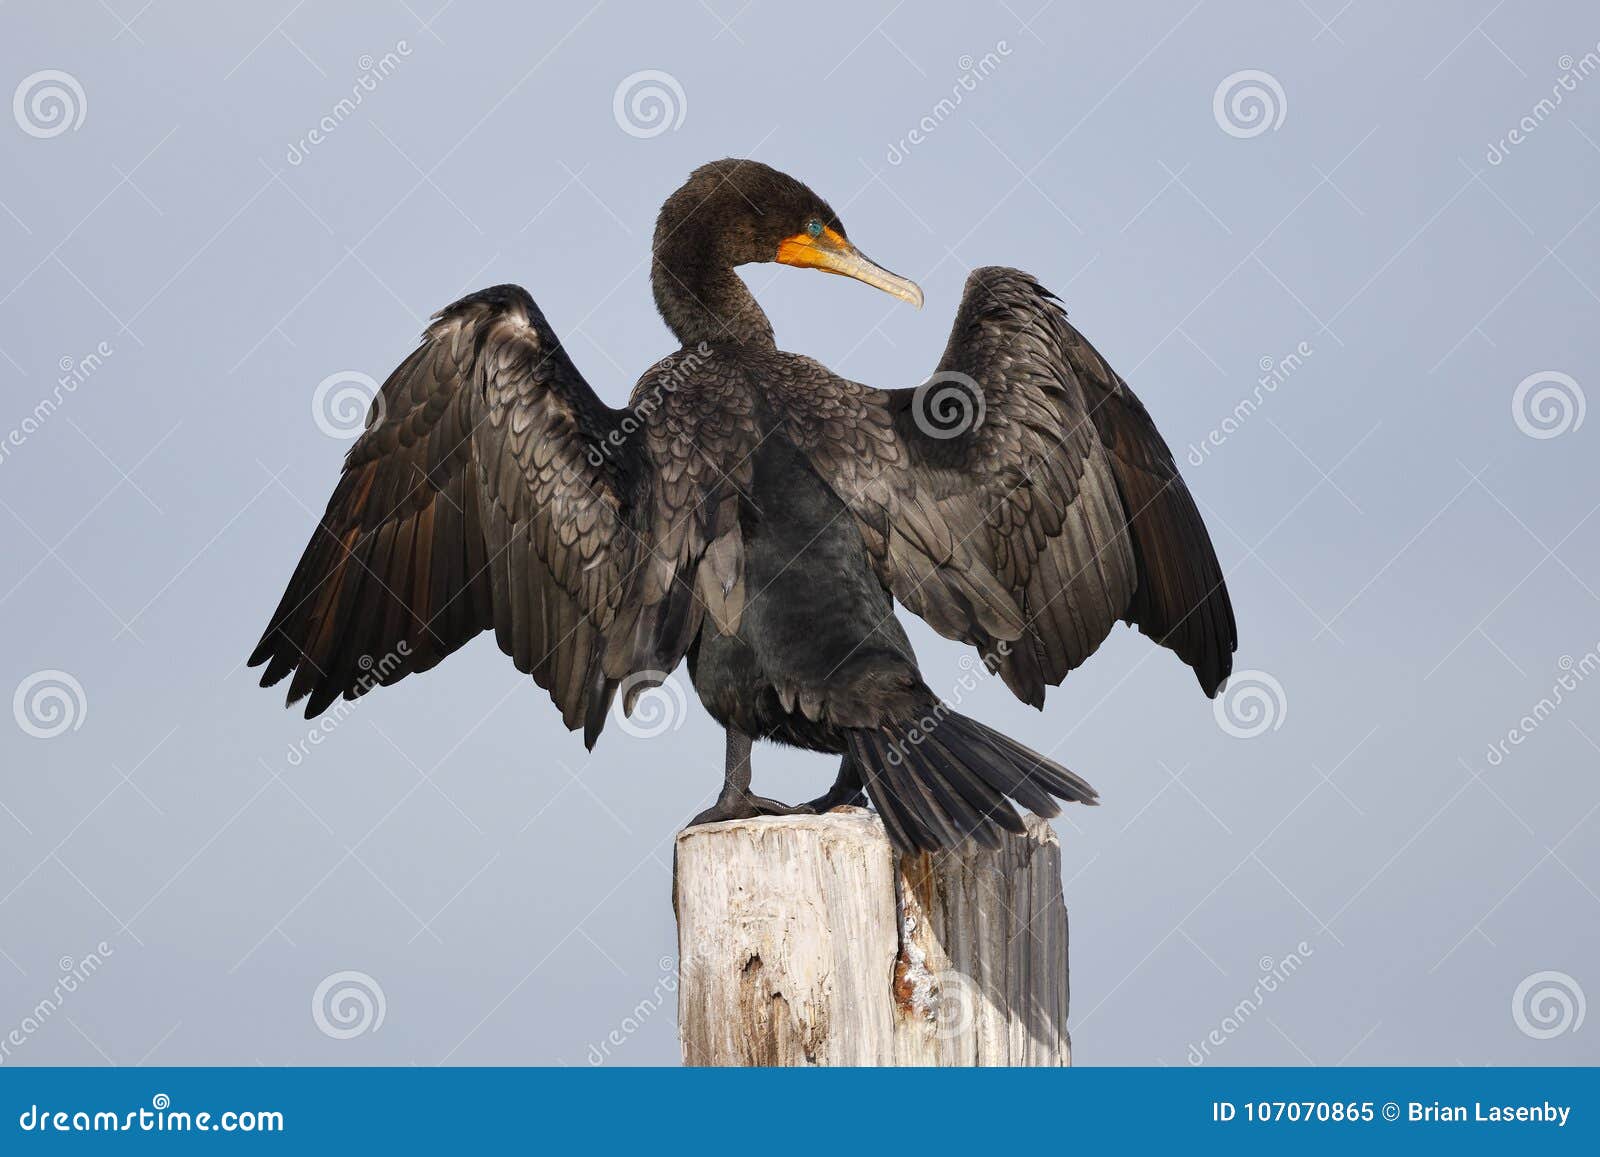 double-crested cormorant perched on a dock piling spreading its